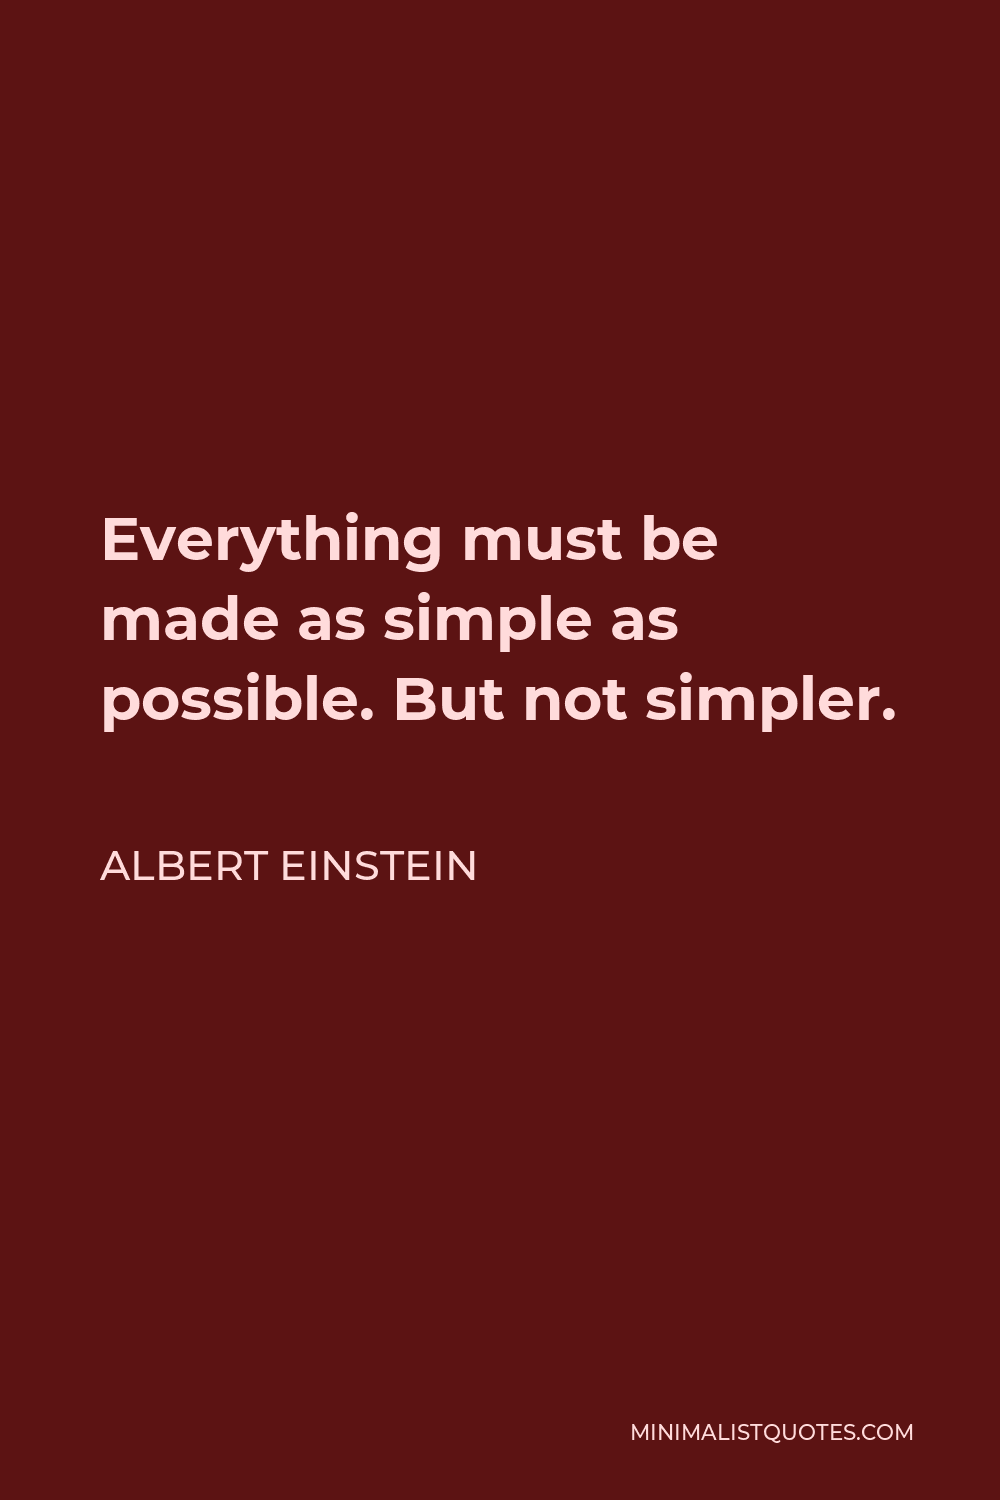 Albert Einstein Quote - Everything must be made as simple as possible. But not simpler.